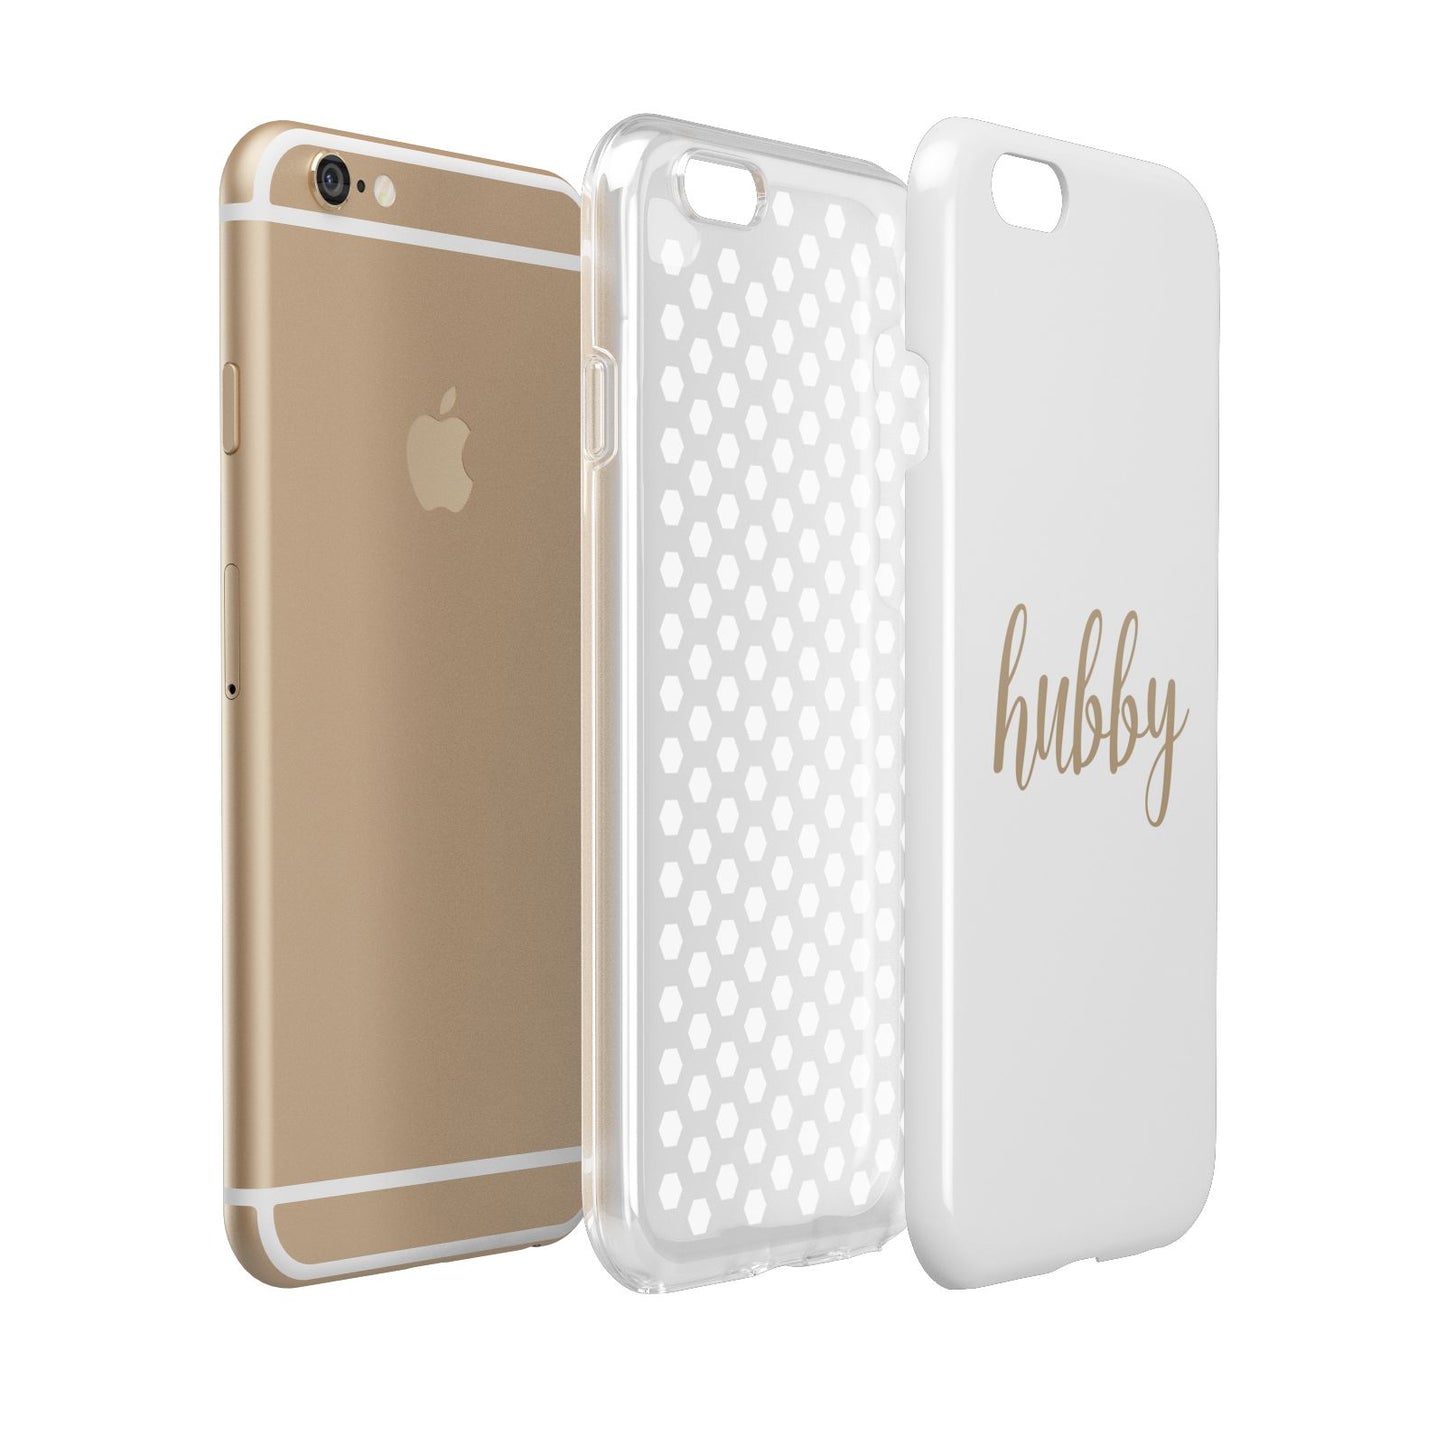 Hubby Apple iPhone 6 3D Tough Case Expanded view